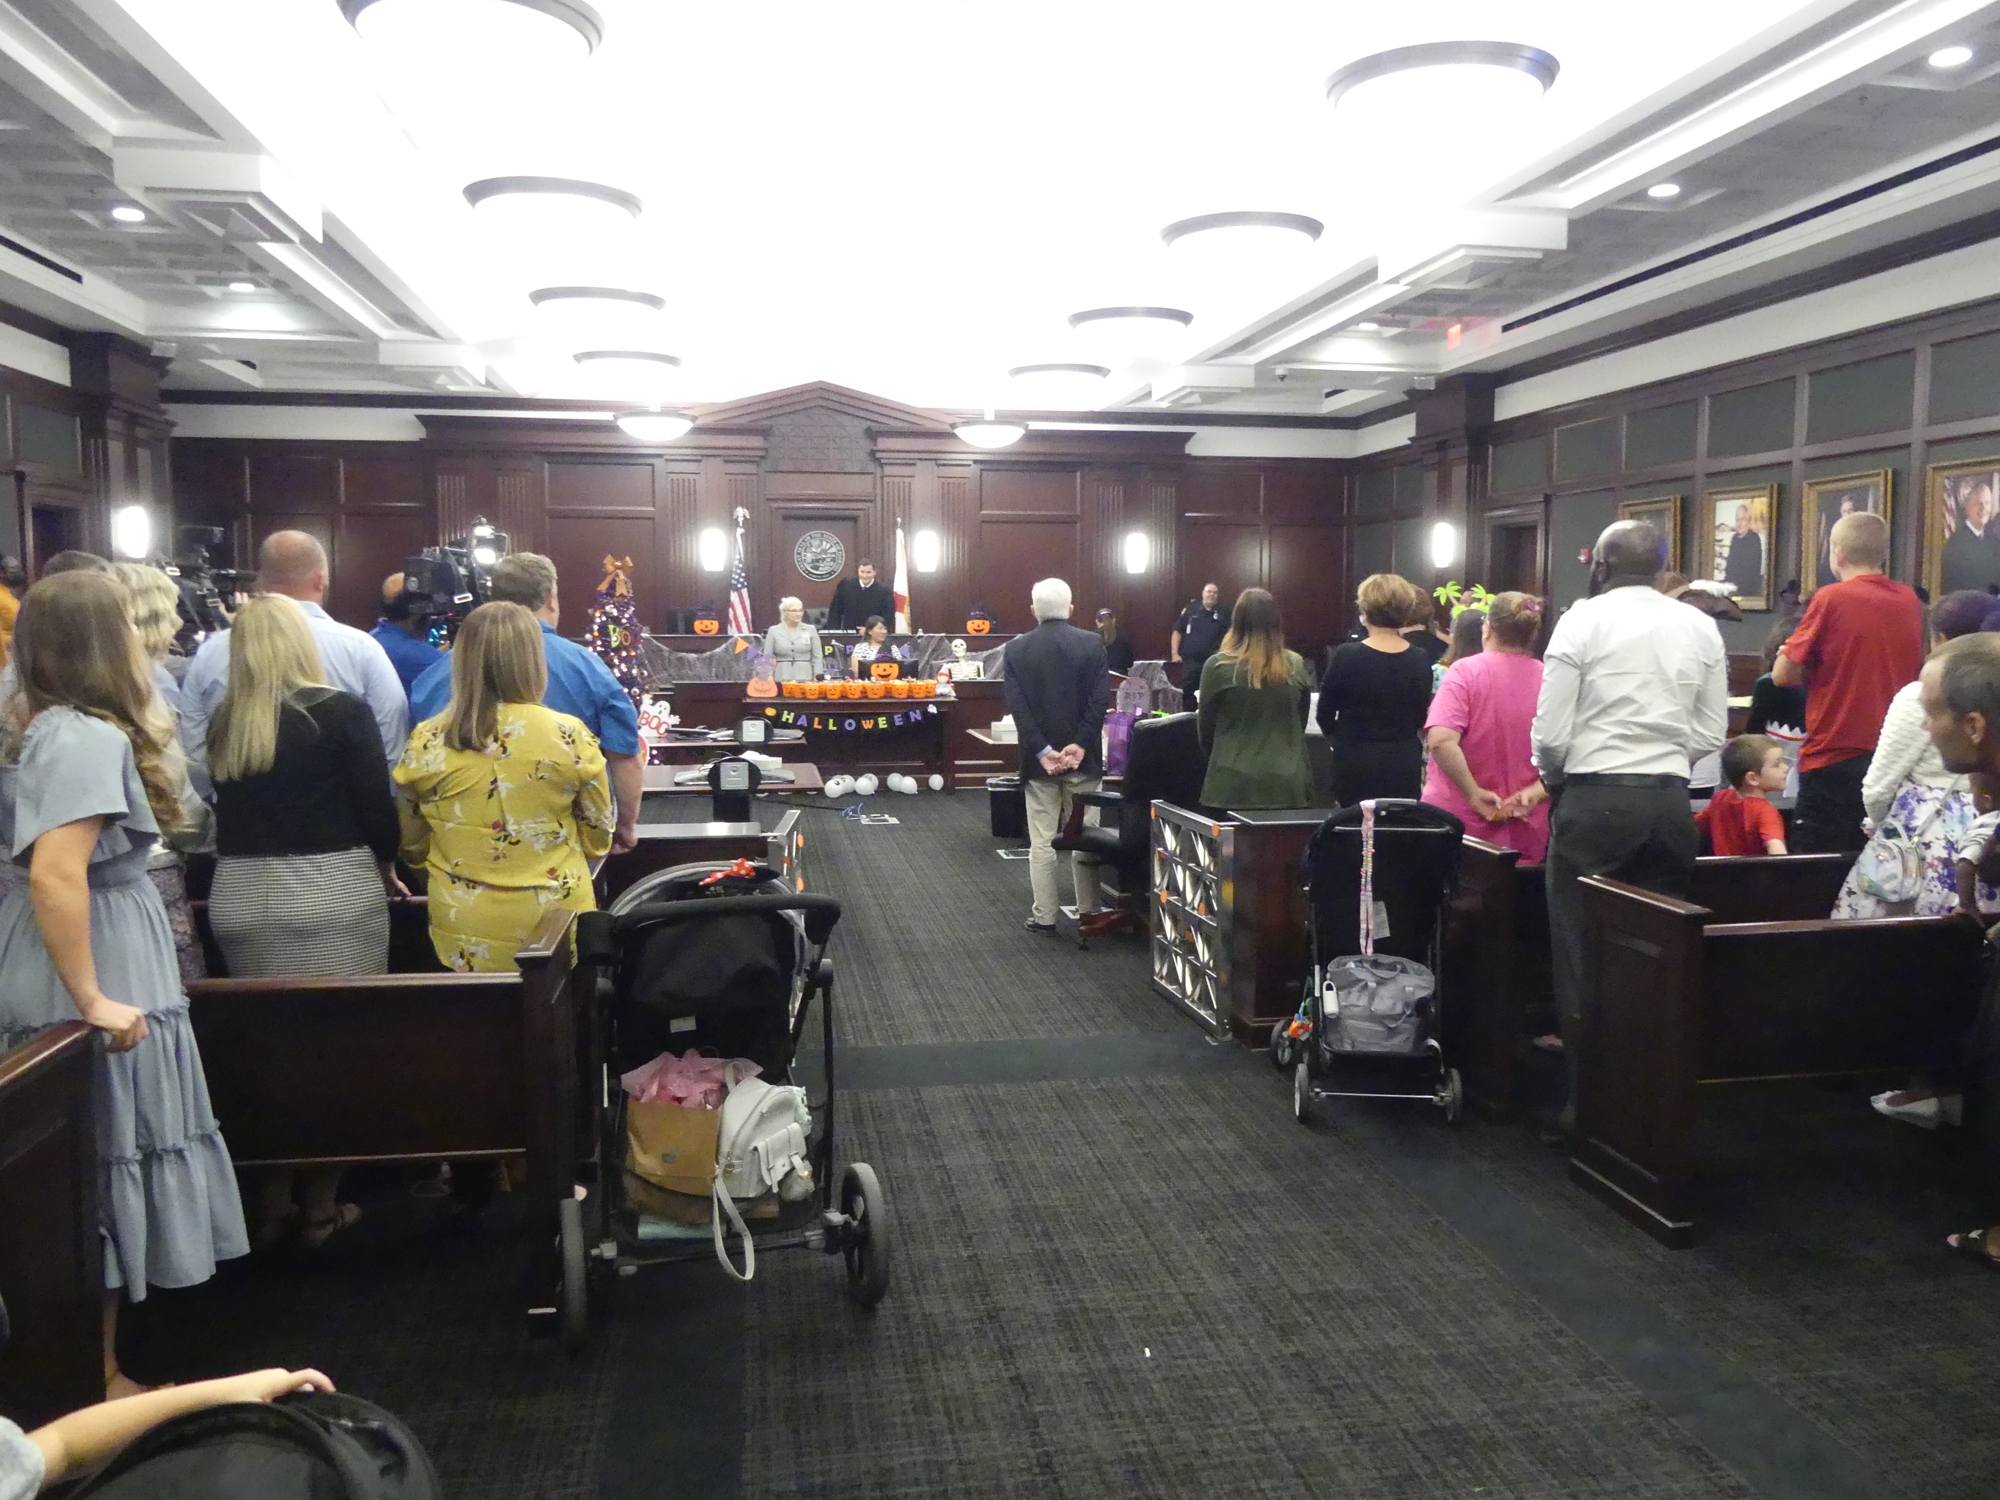 Courtroom 407 at the Duval County Courthouse was filled to capacity Oct. 29 for an in-person adoption ceremony.